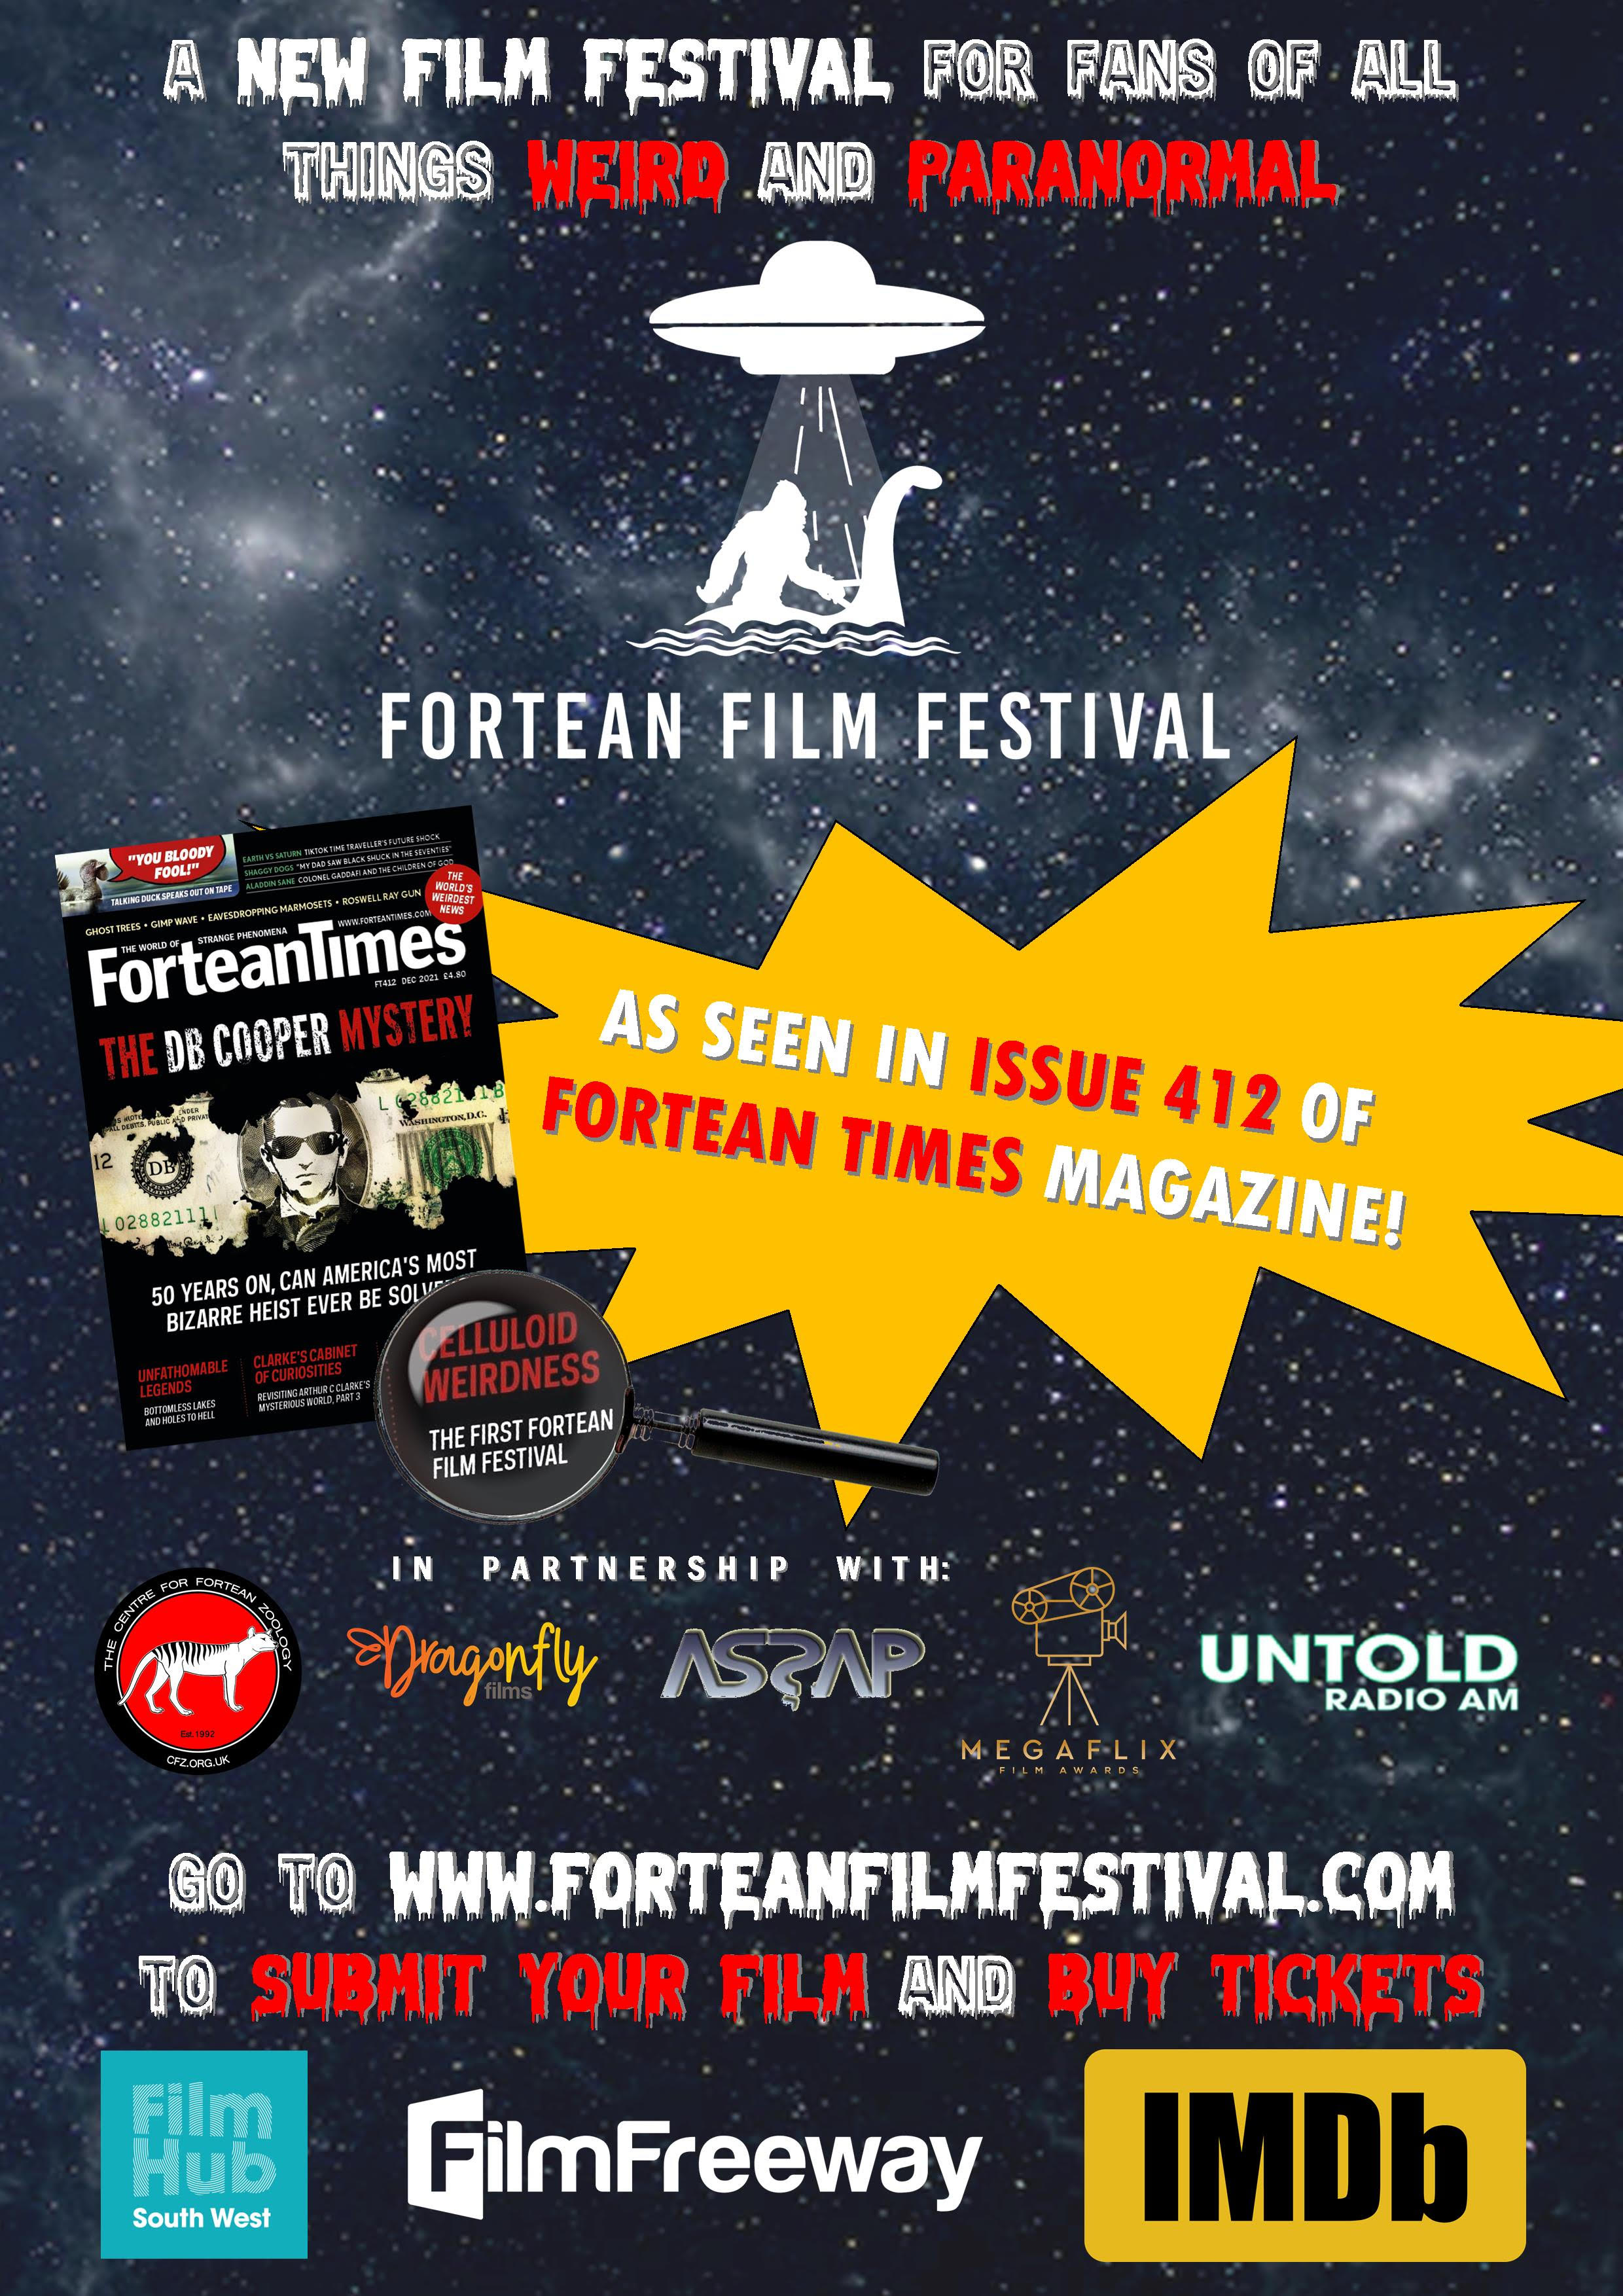 Fortean Film Festival Tickets Are On Sale Now